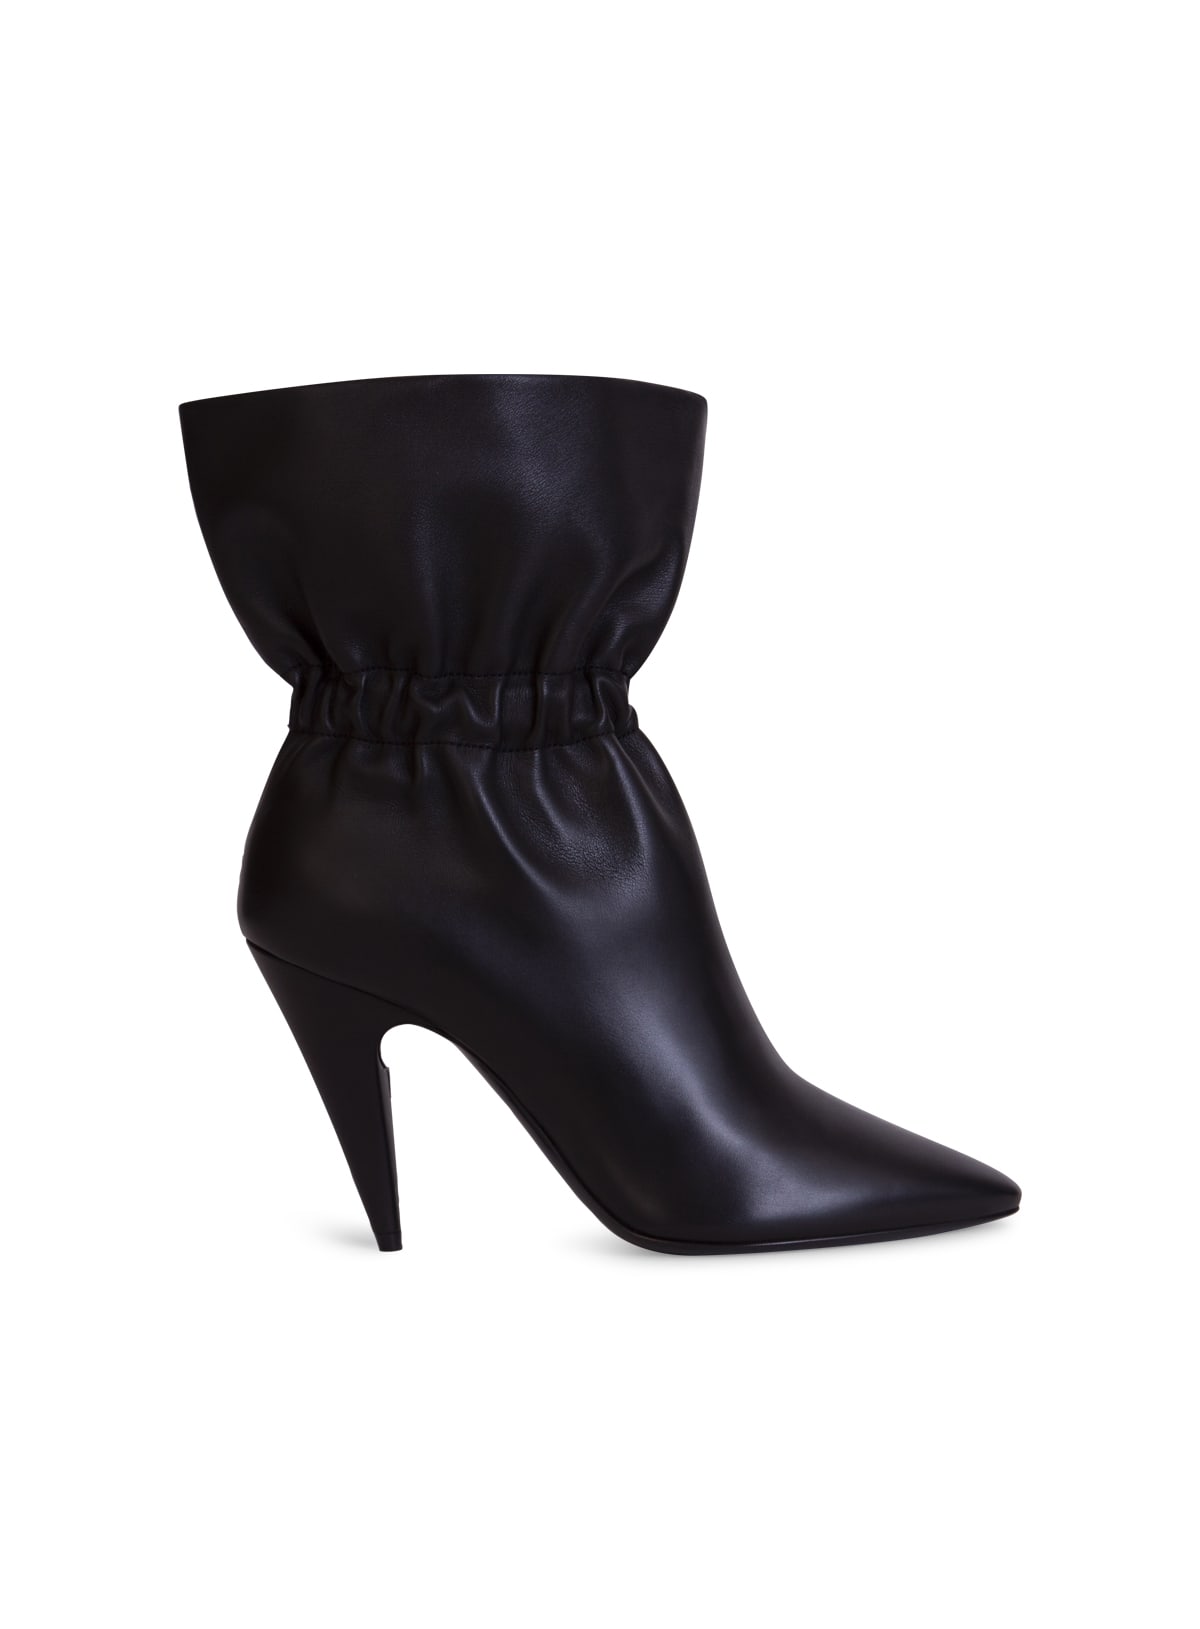 Saint Laurent Etienne Ankle Boots In Smooth Leather